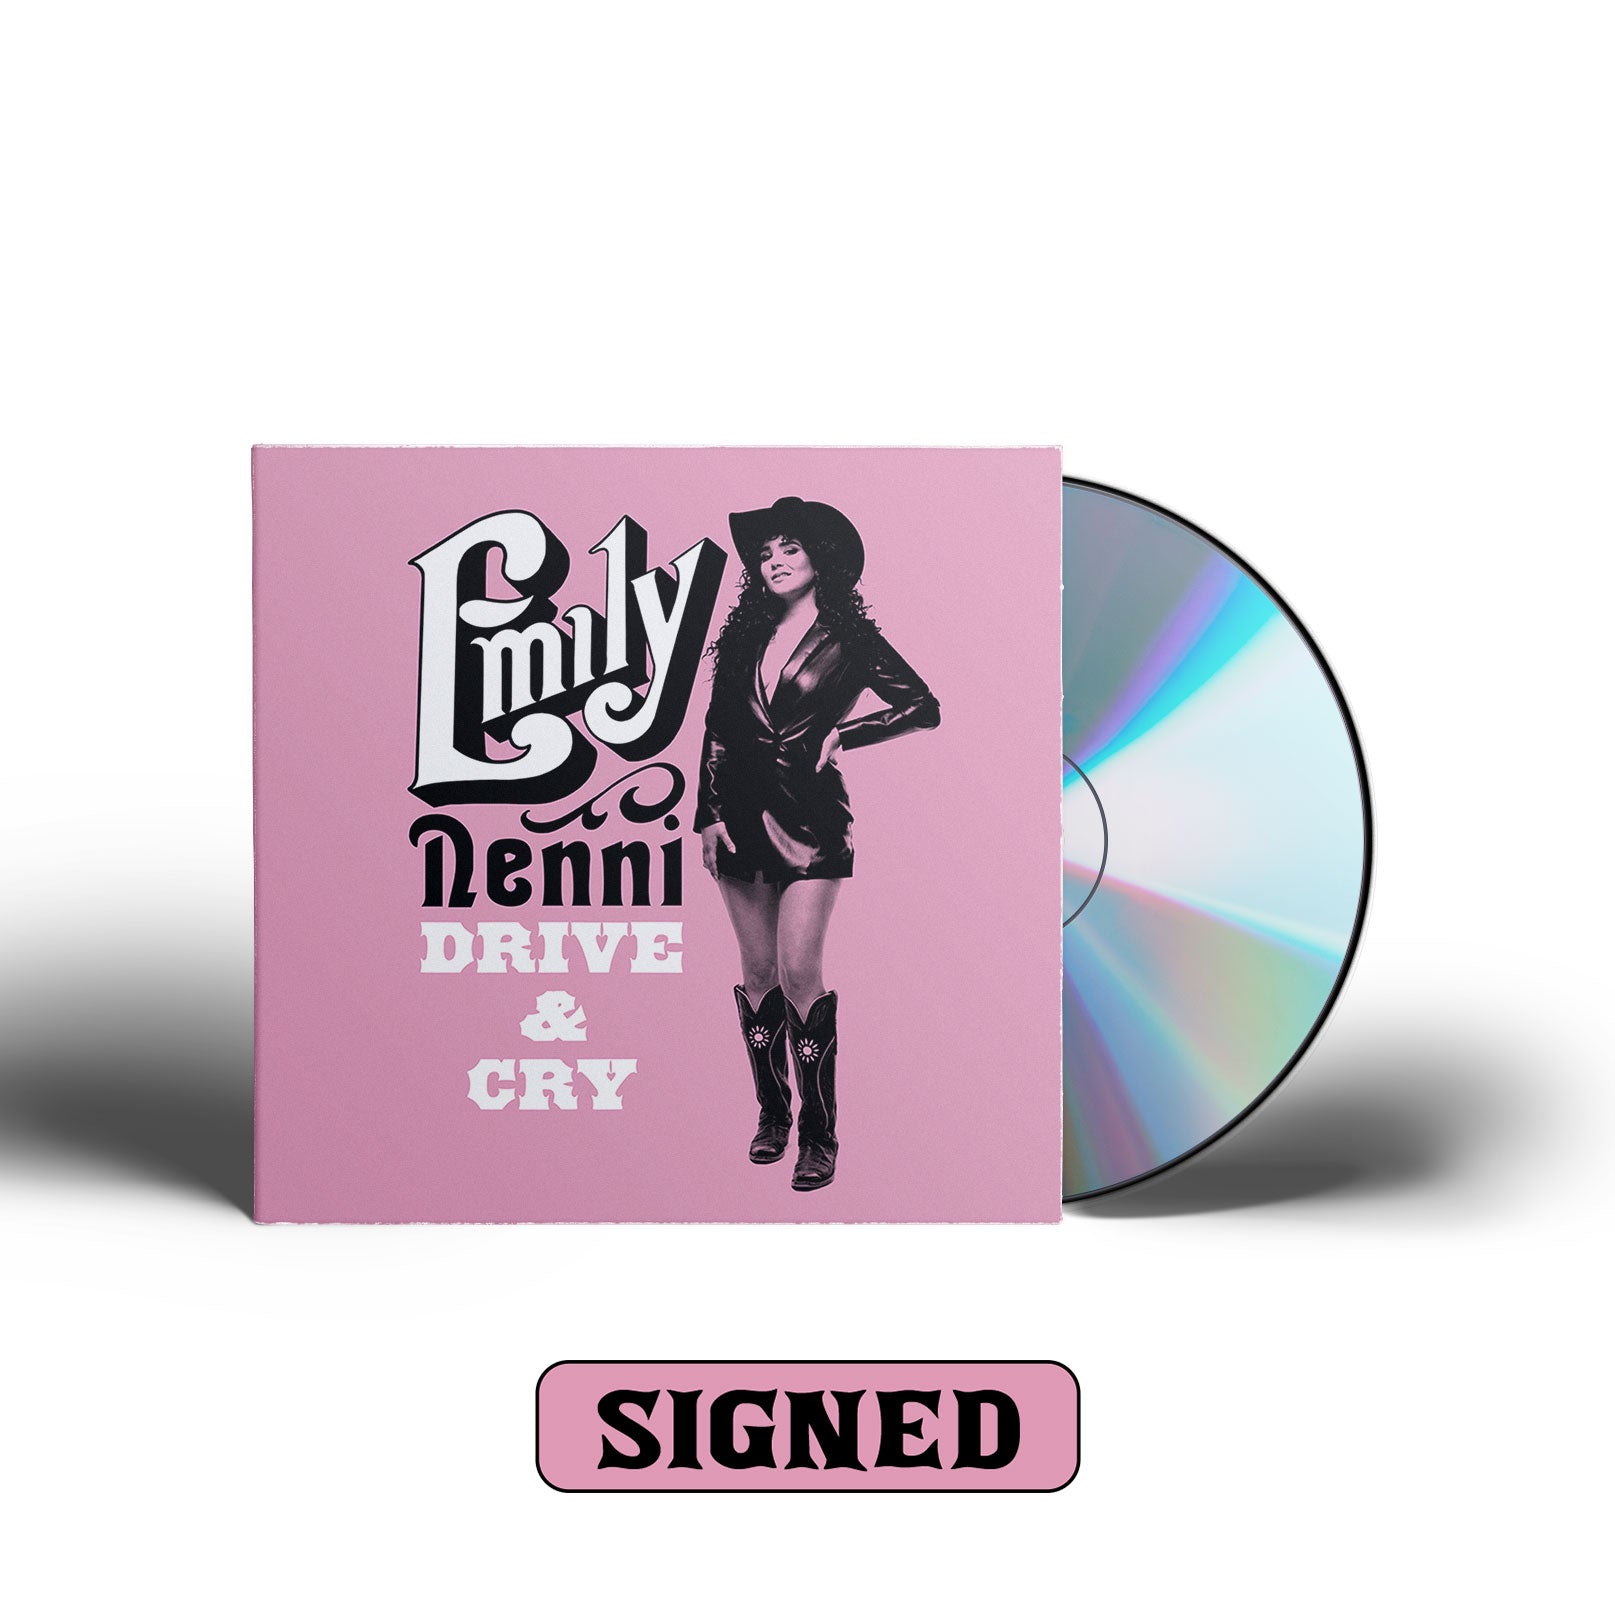 Emily Nenni - Drive & Cry [SIGNED CD]